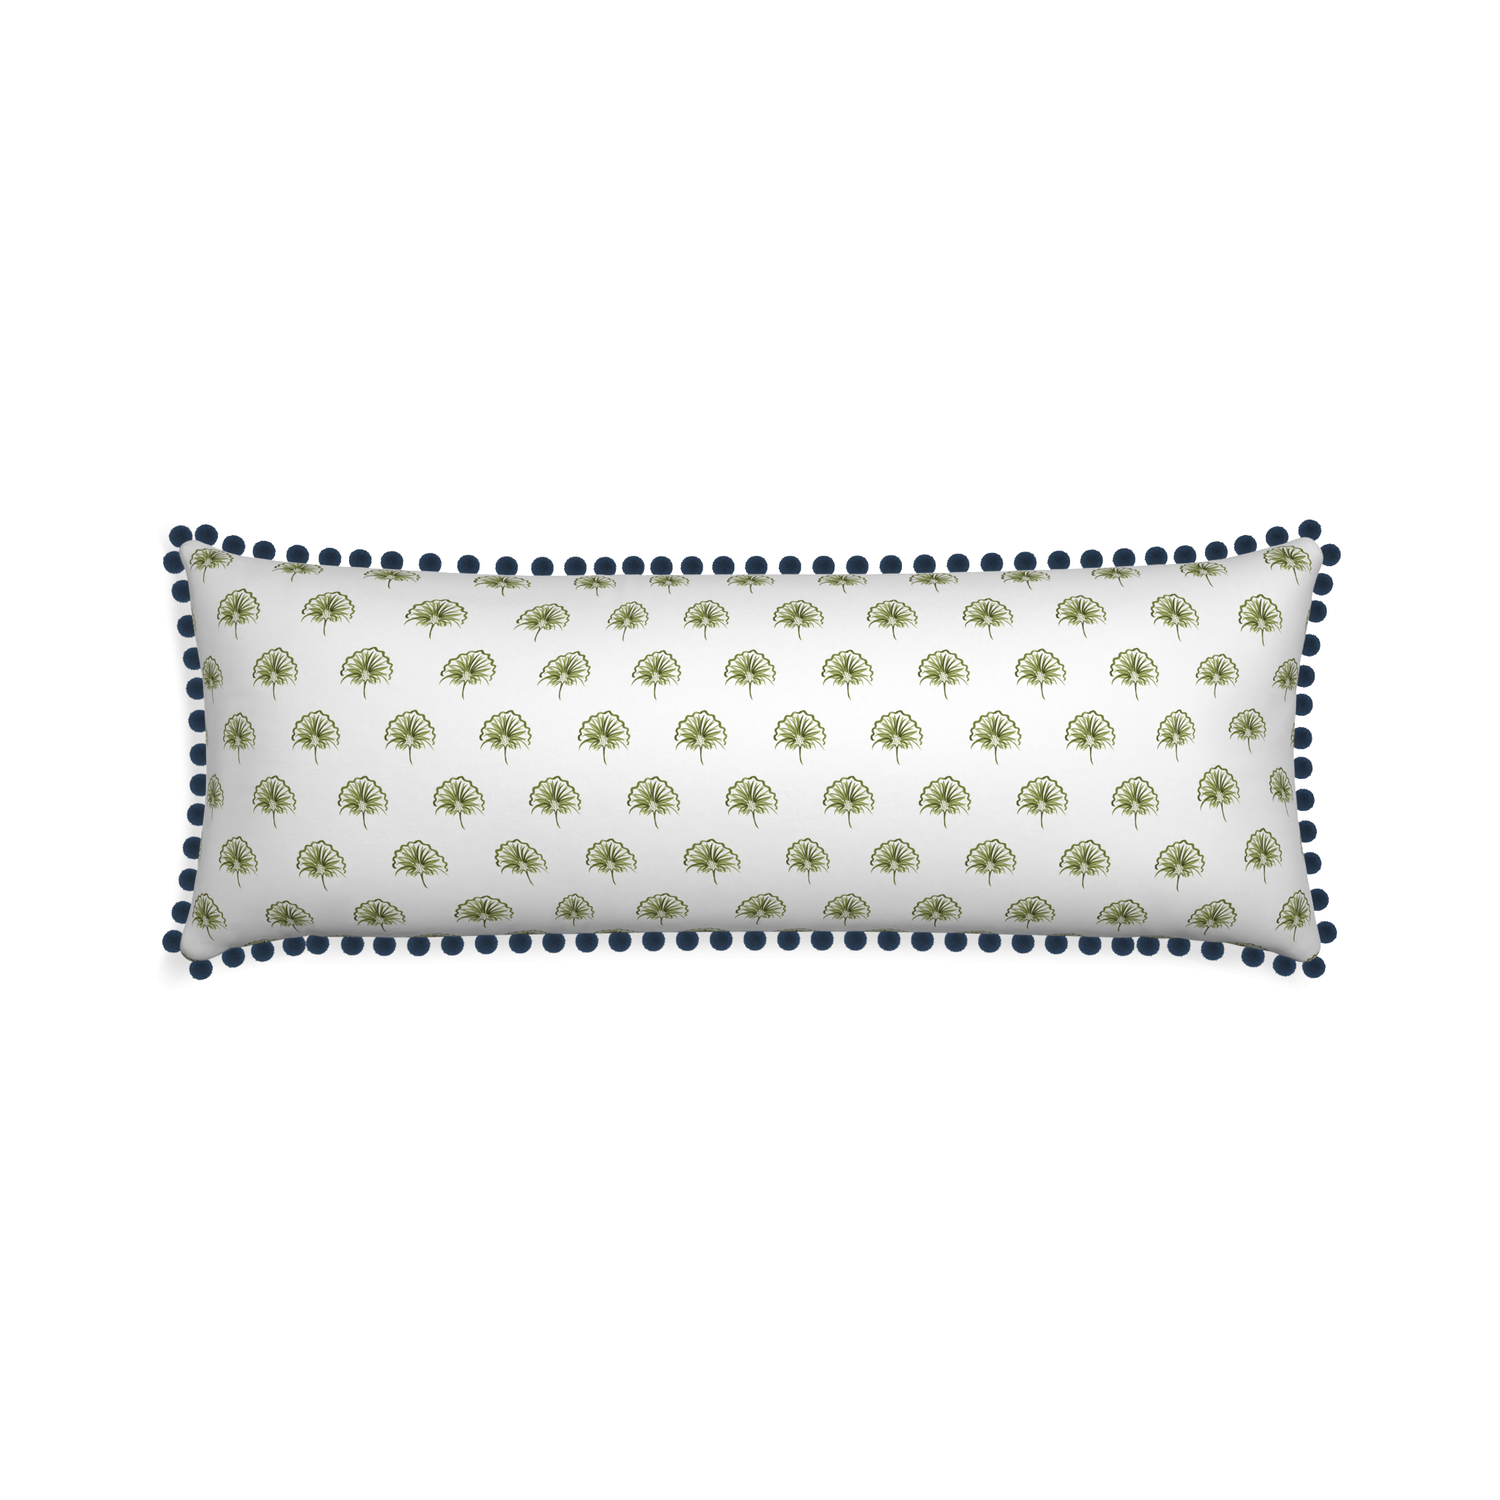 Xl-lumbar penelope moss custom green floralpillow with c on white background